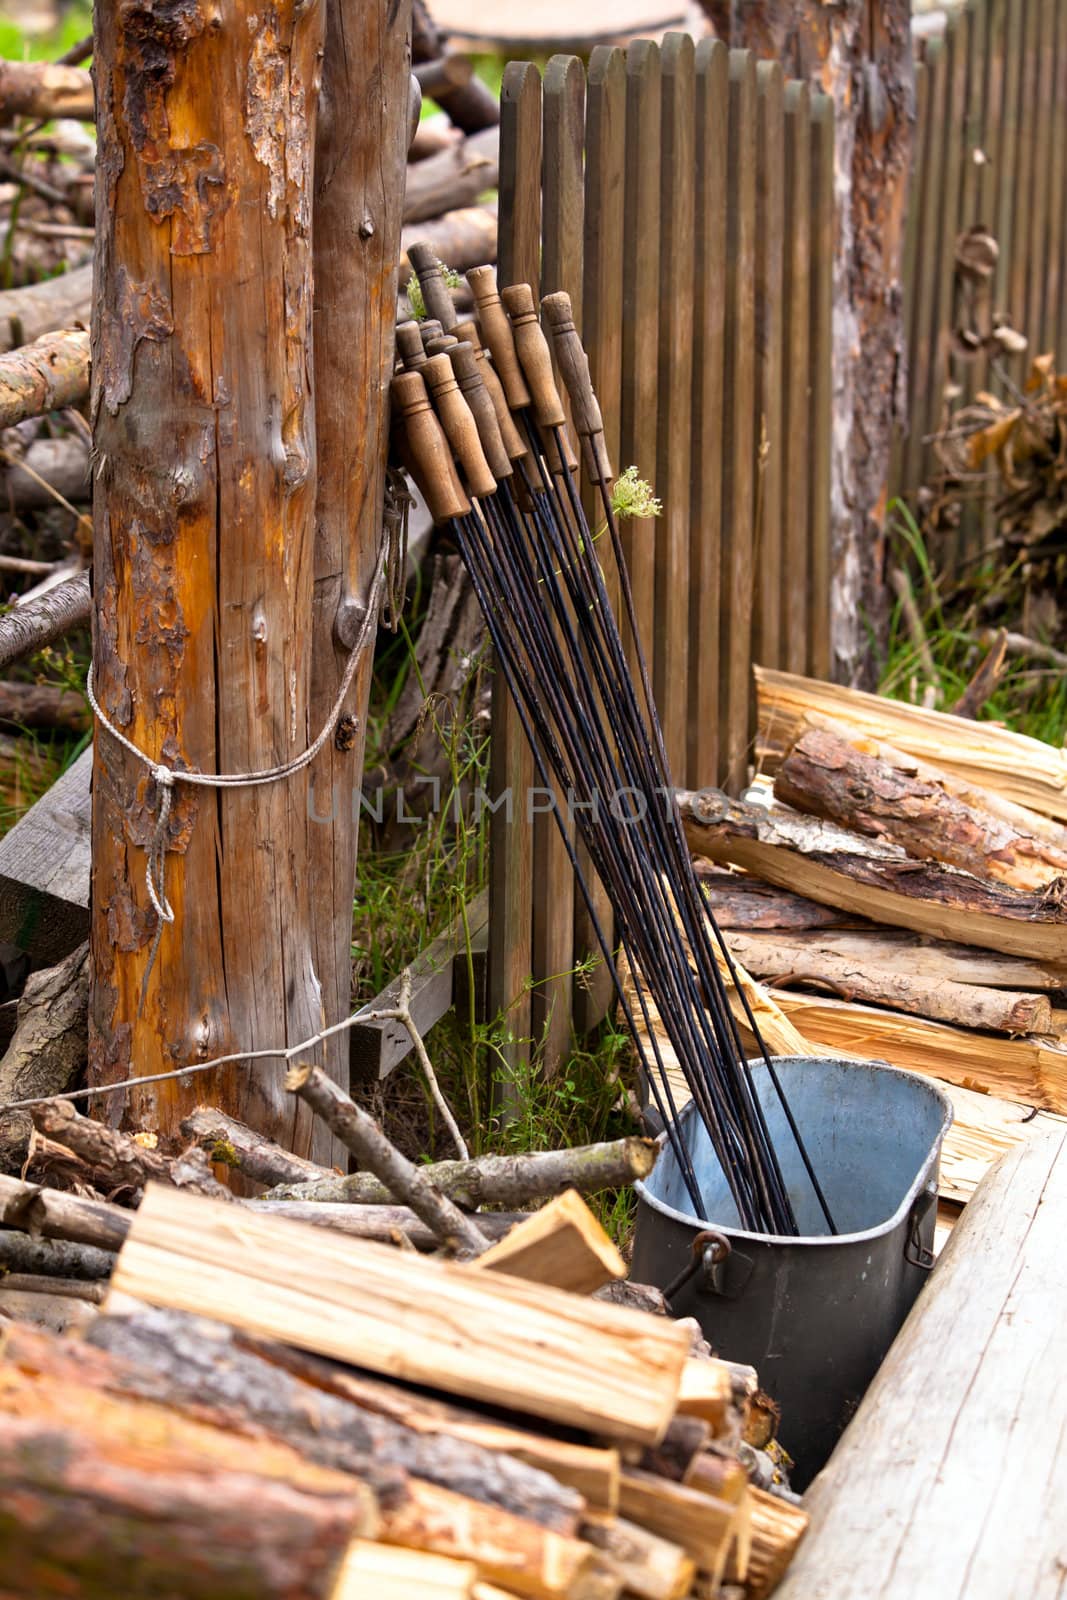 Wooden fence and steel sticks for barbecue
